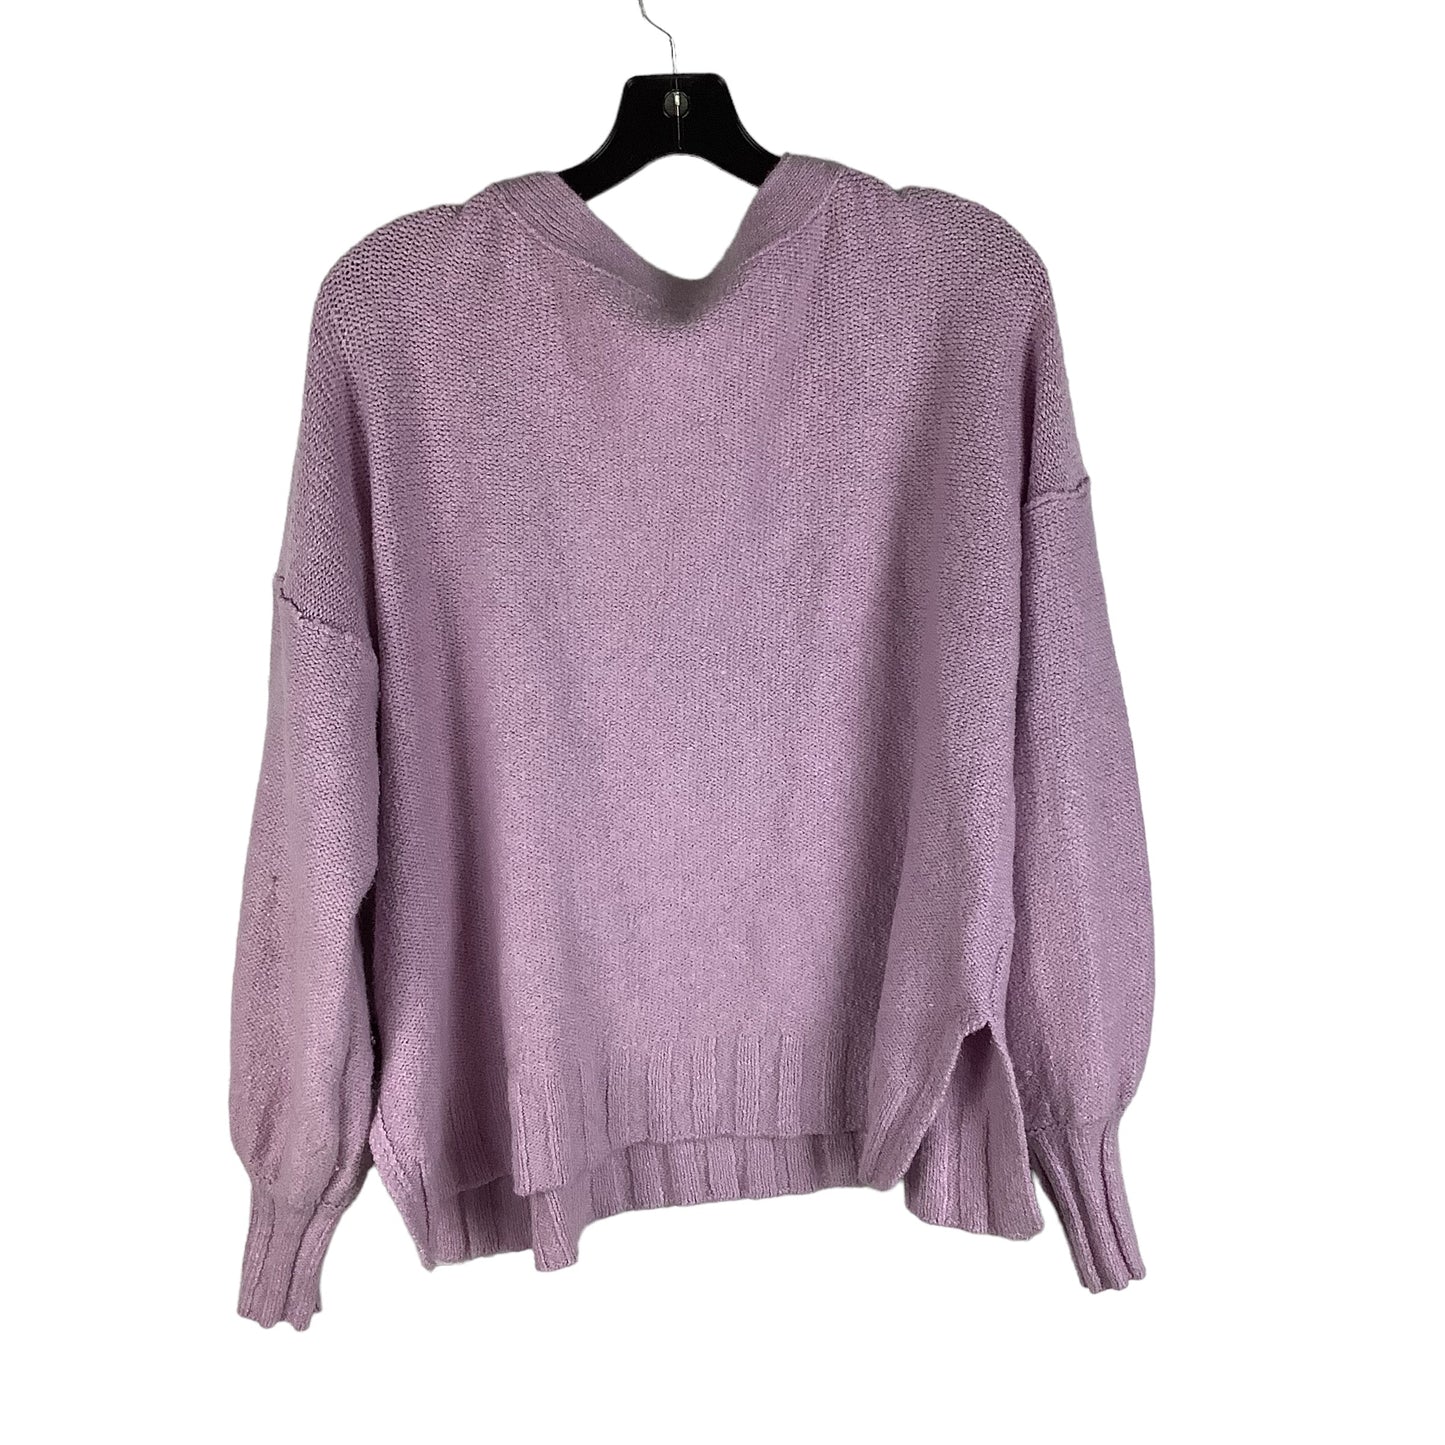 Sweater By Pilcro  Size: L